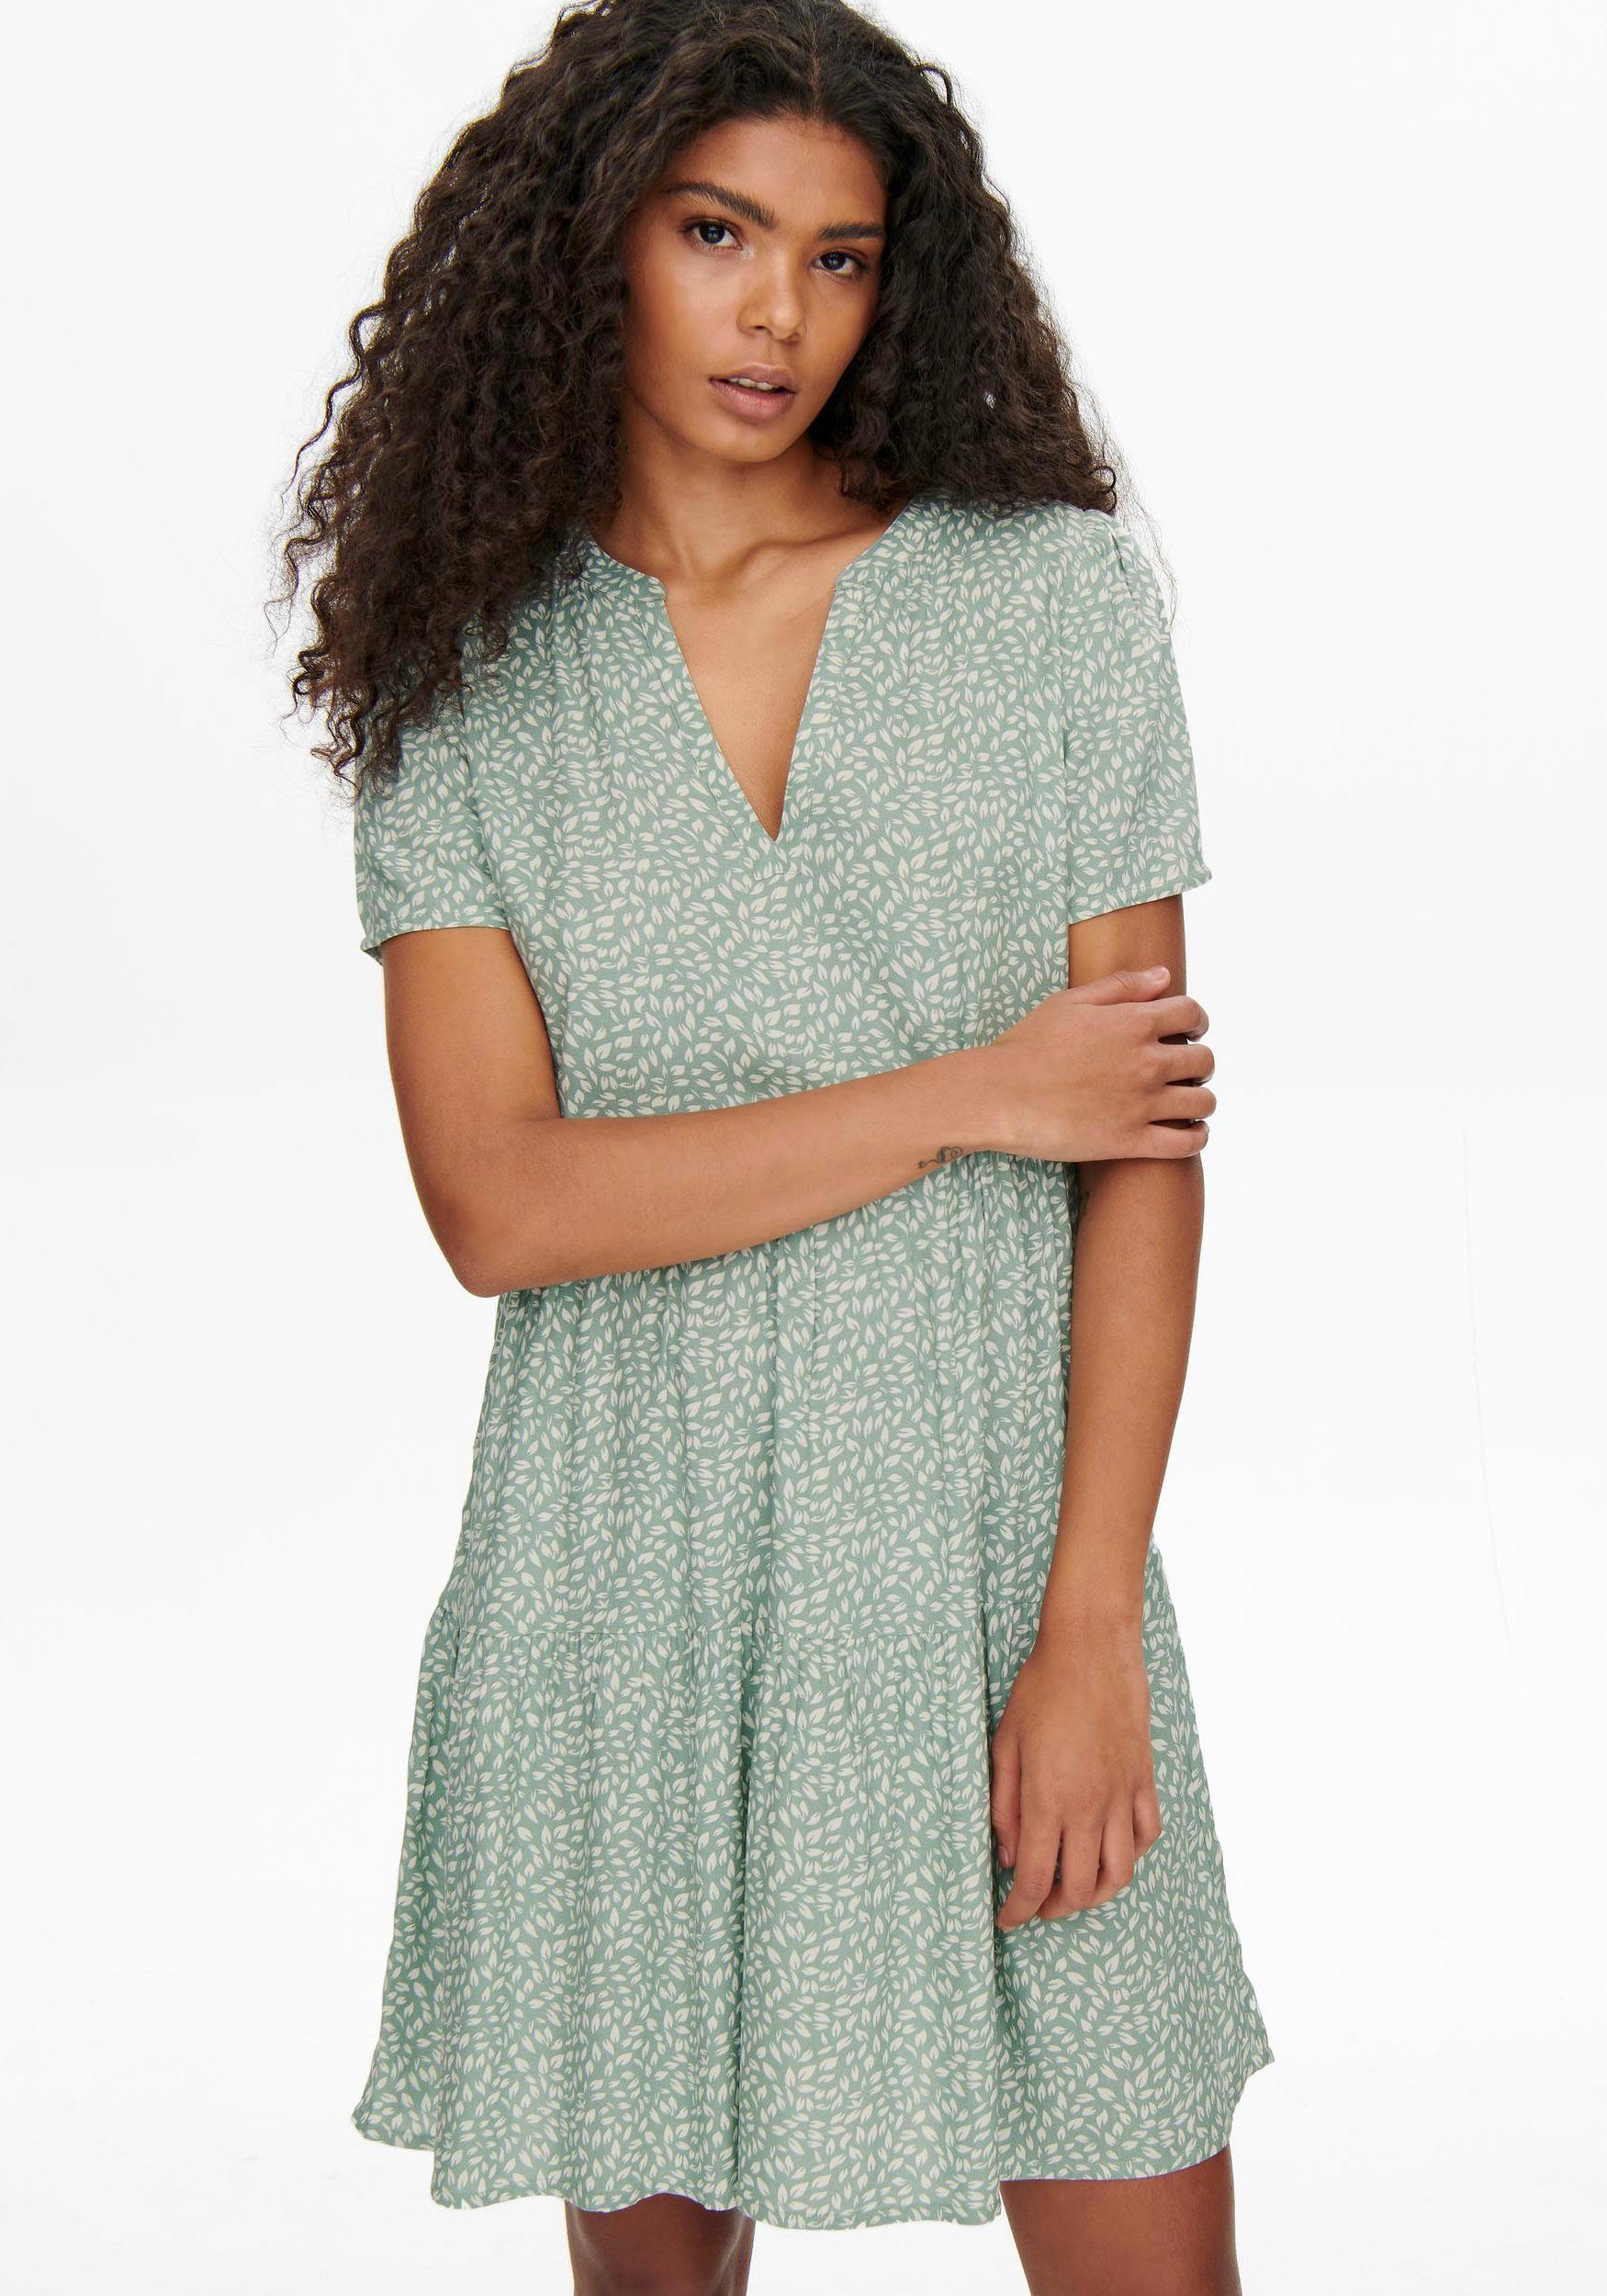 ONLY Sommerkleid ONLZALLY DRESS AOP:White PTM S/S NOOS leafs THEA LIFE Chinois Green